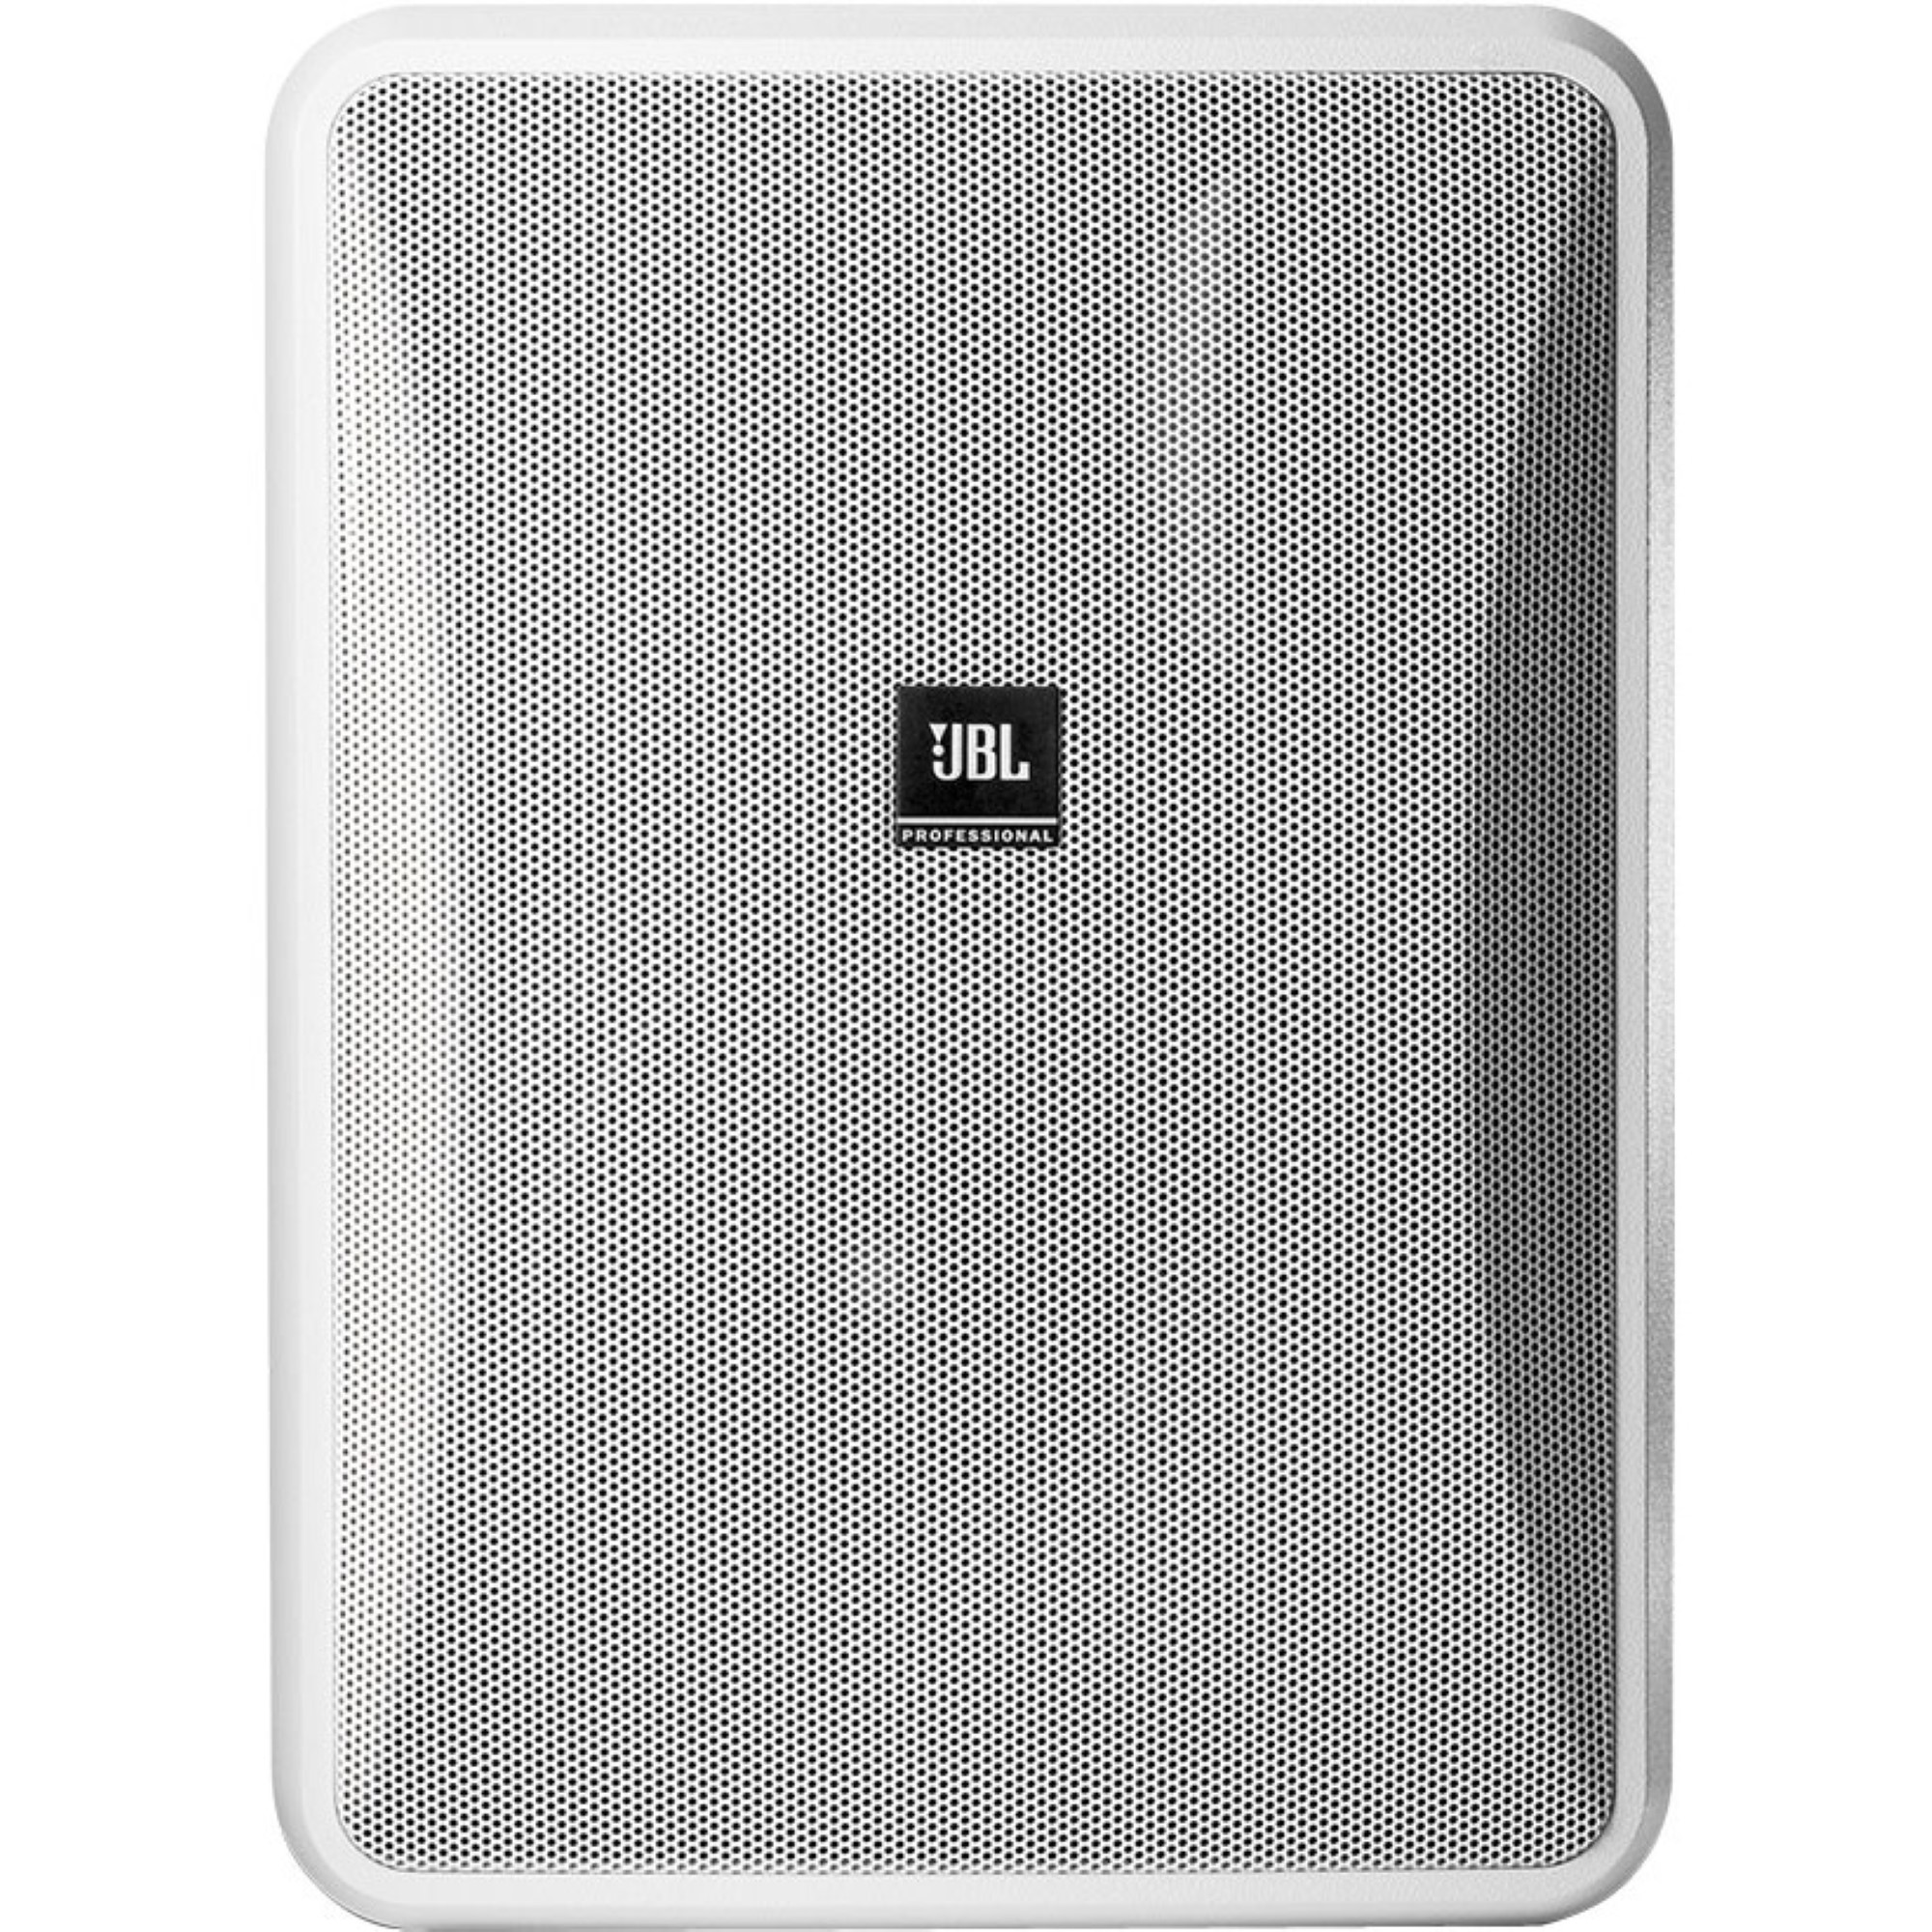 JBL Professional CONTROL 28-1L 2-way Indoor/Outdoor Wall Mountable Speaker - 240W RMS - White - image 1 of 2